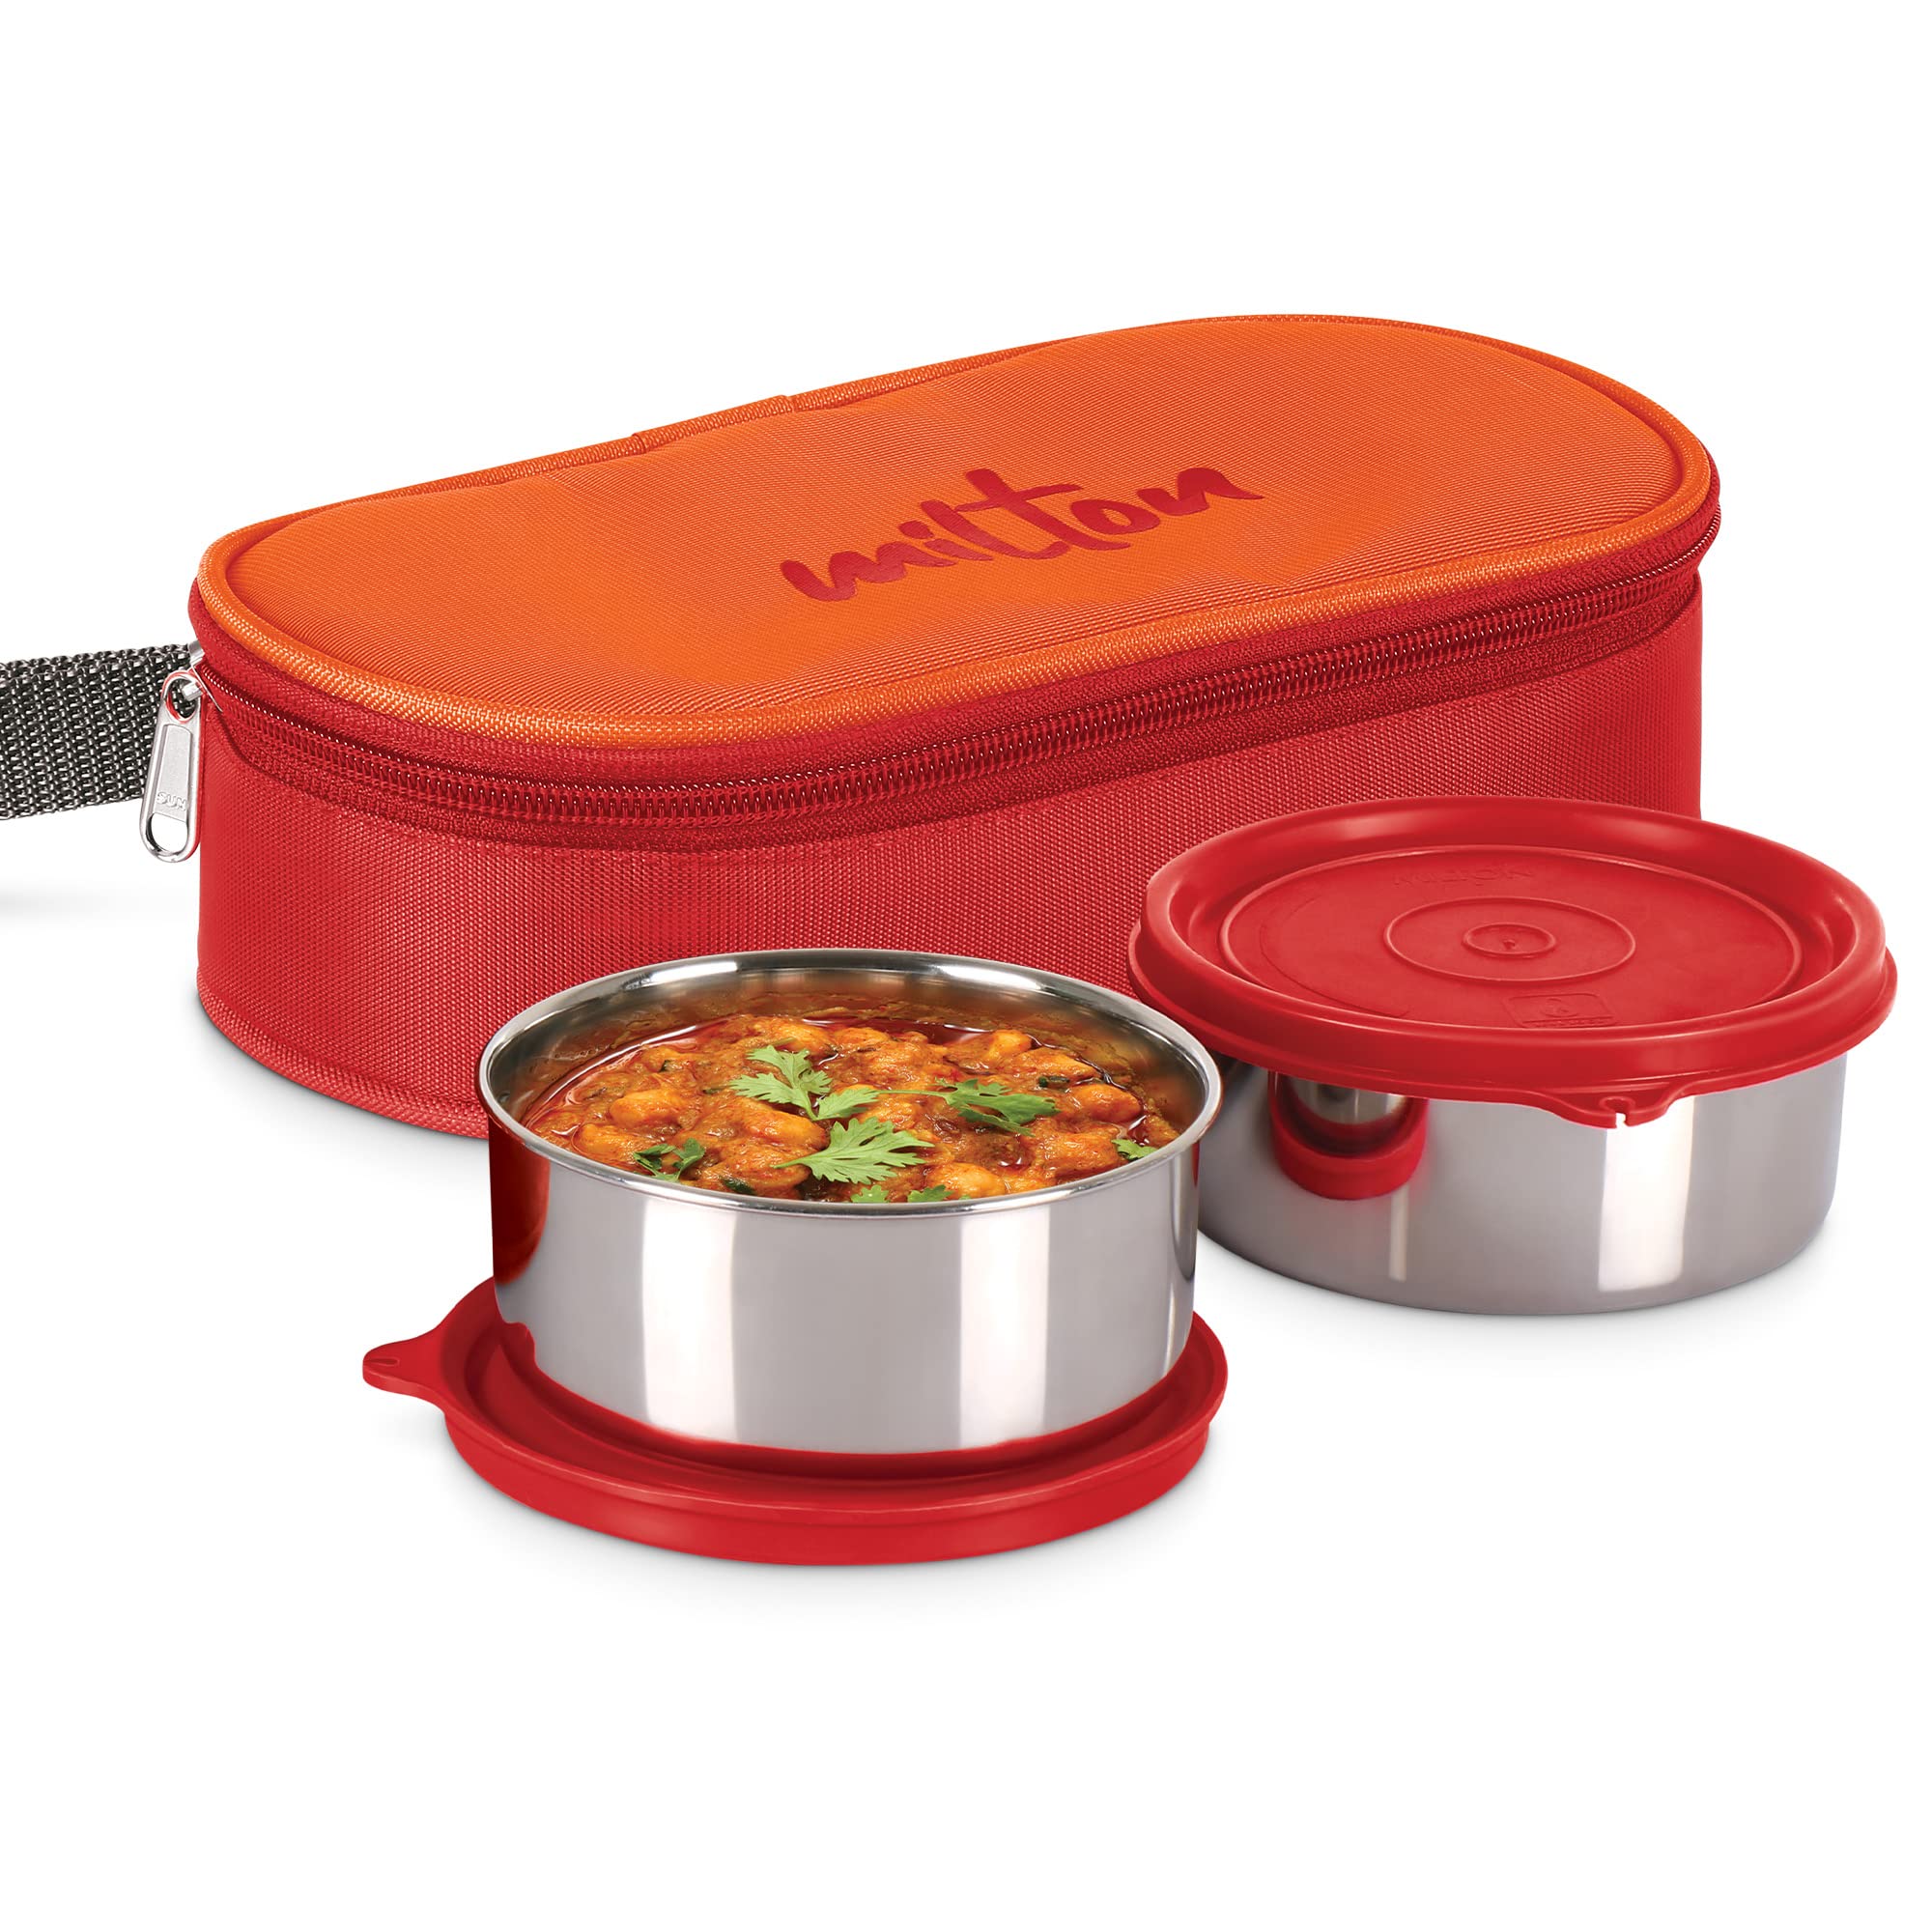 milton lunch box 2 containers